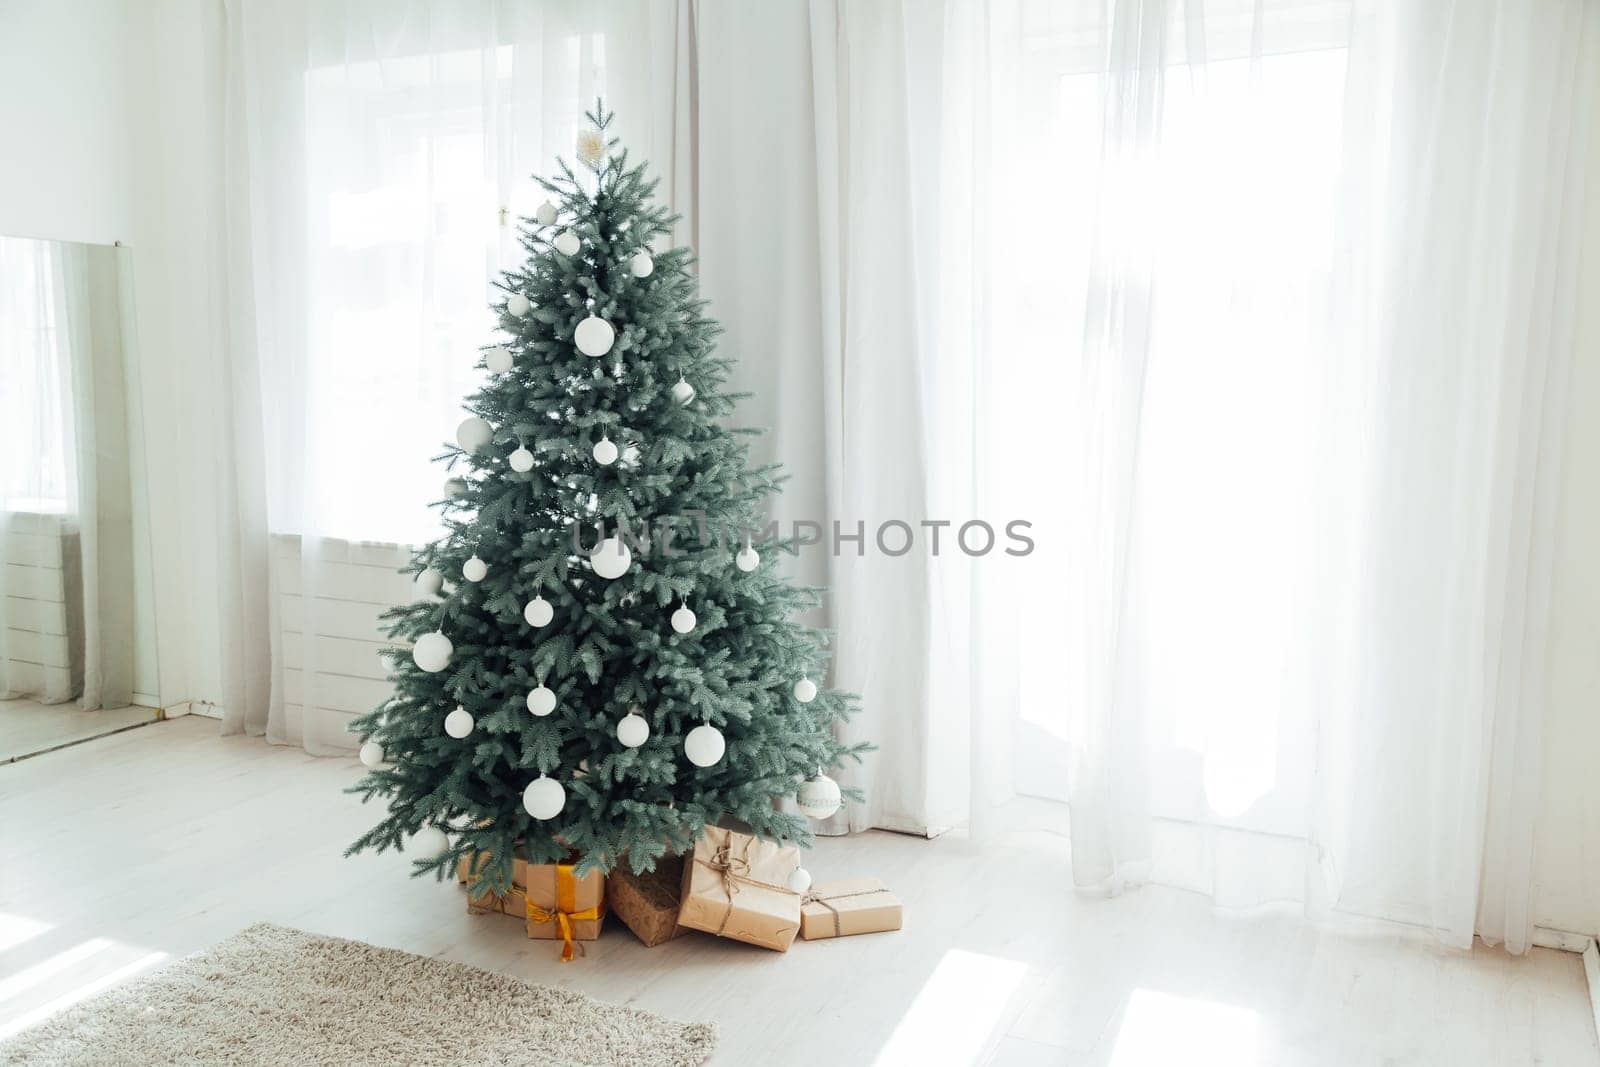 New Year's decoration Christmas tree with gifts and interior